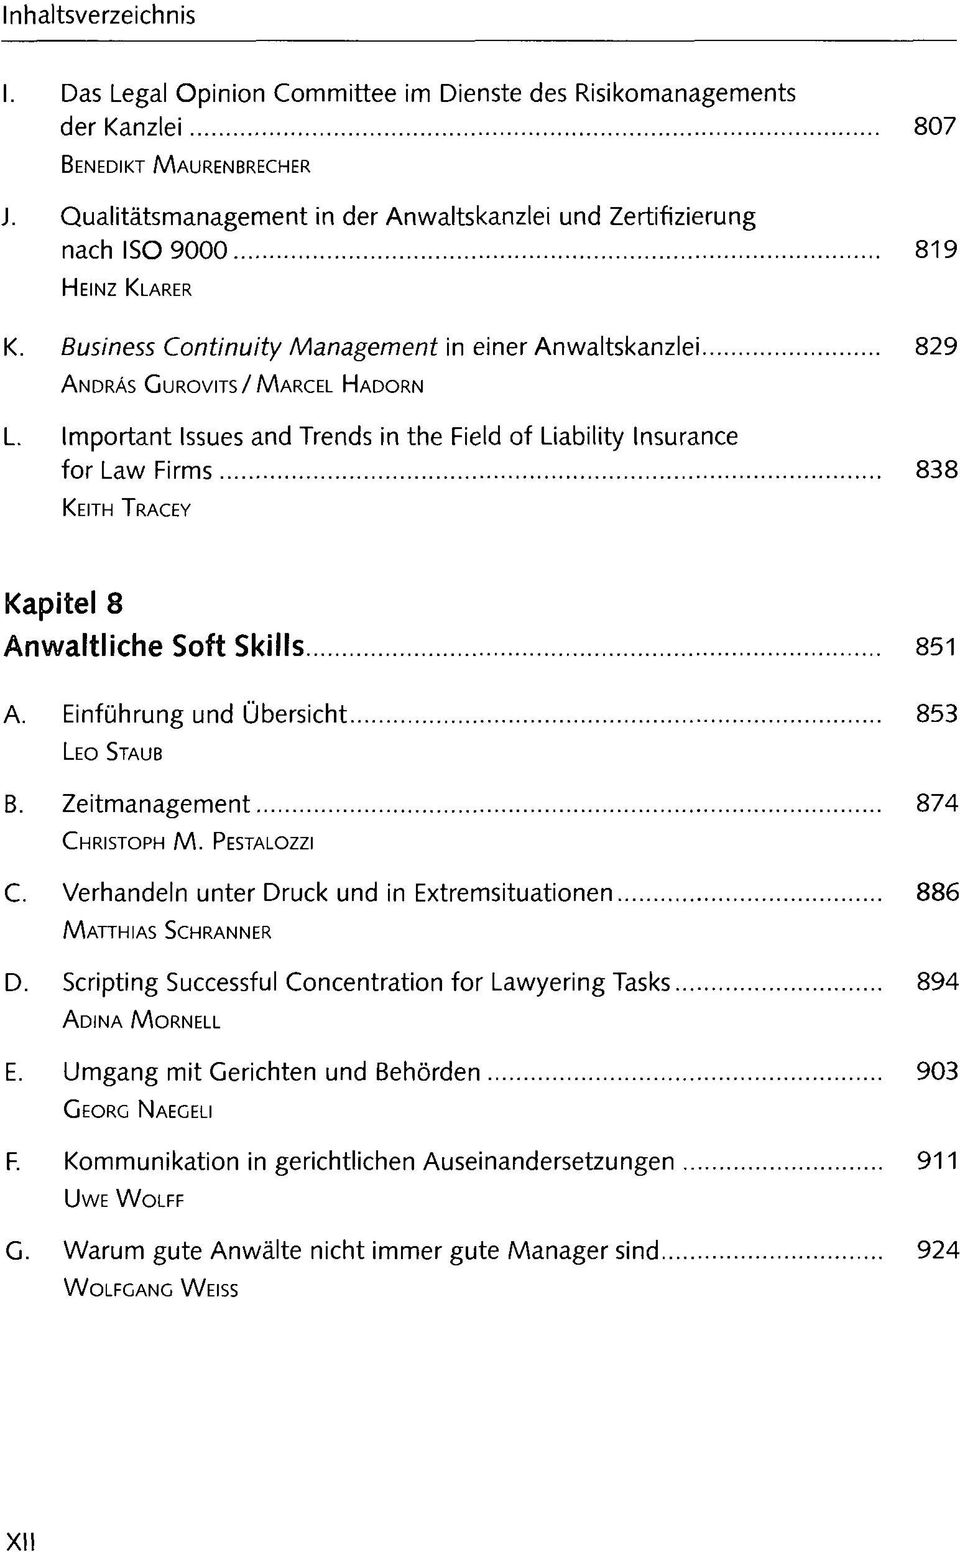 Important Issues and Trends in the Field of Liability Insurance for Law Firms 838 KEITH TRACEY Kapitel 8 Anwaltliche Soft Skills 851 A. Einführung und Übersicht 853 B. Zeitmanagement 874 CHRISTOPH M.